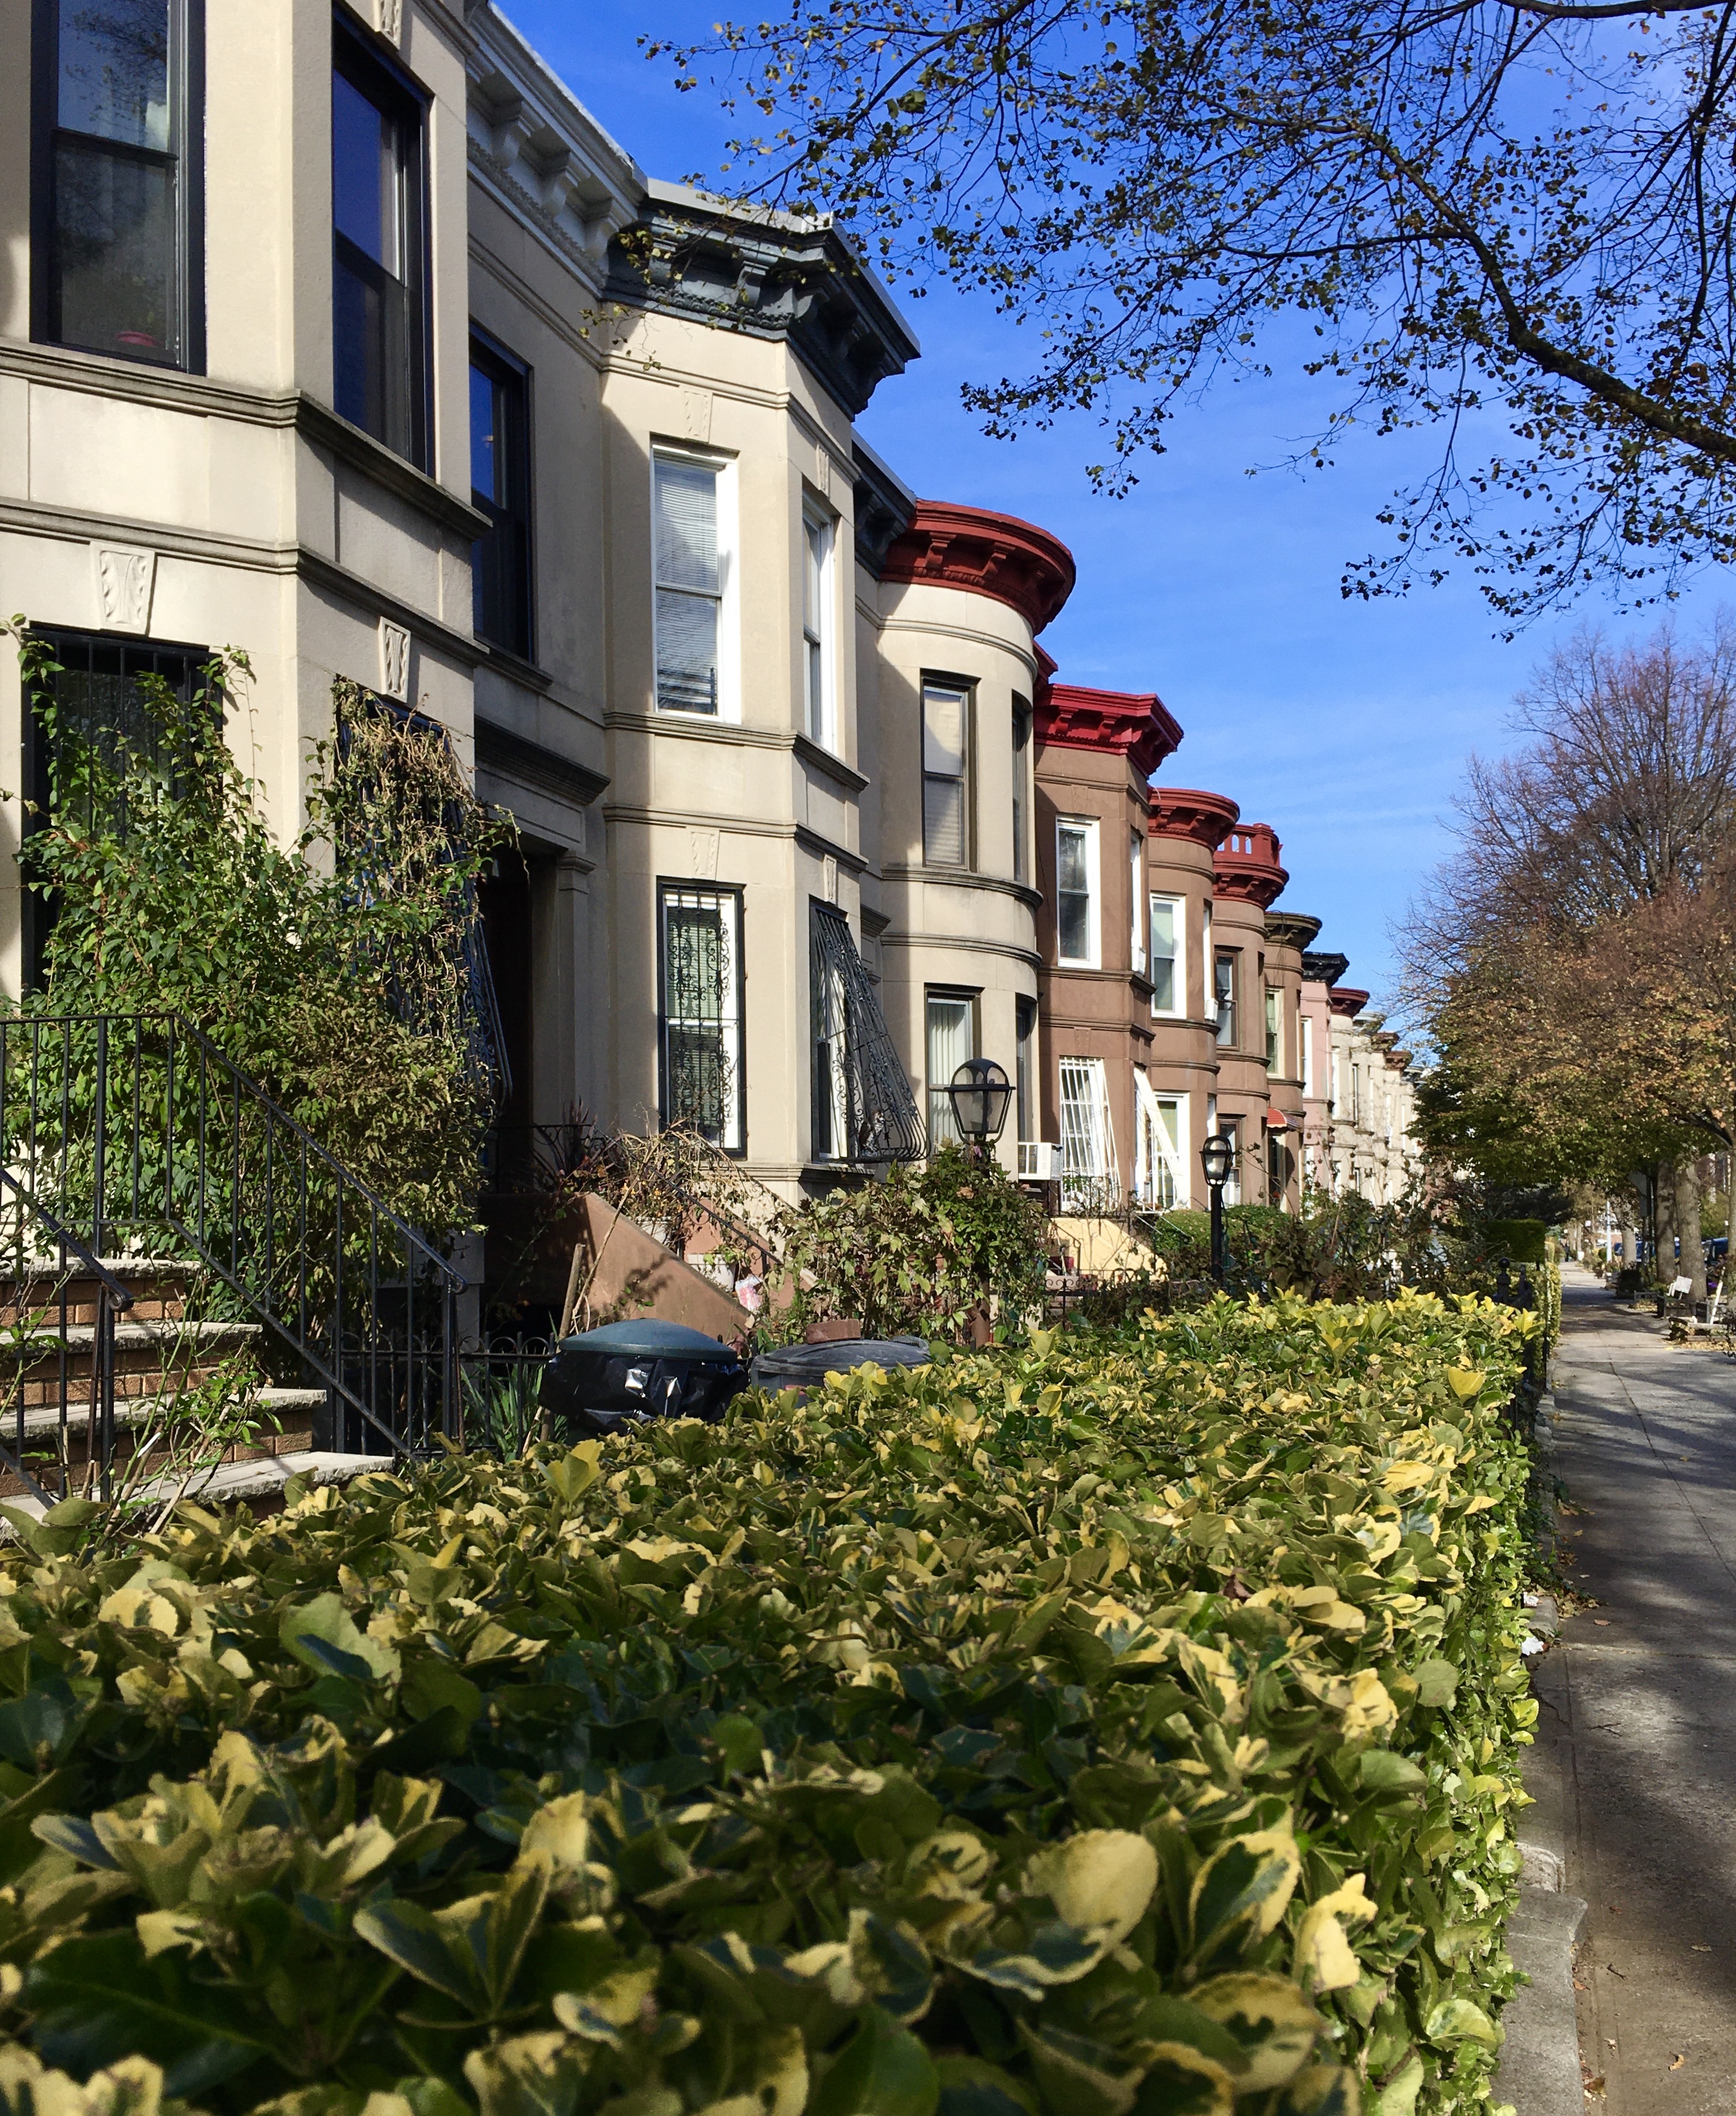 The shrubbery in this East 25th Street garden is leafy even in late autumn. Photo: Lore Croghan/Brooklyn Eagle